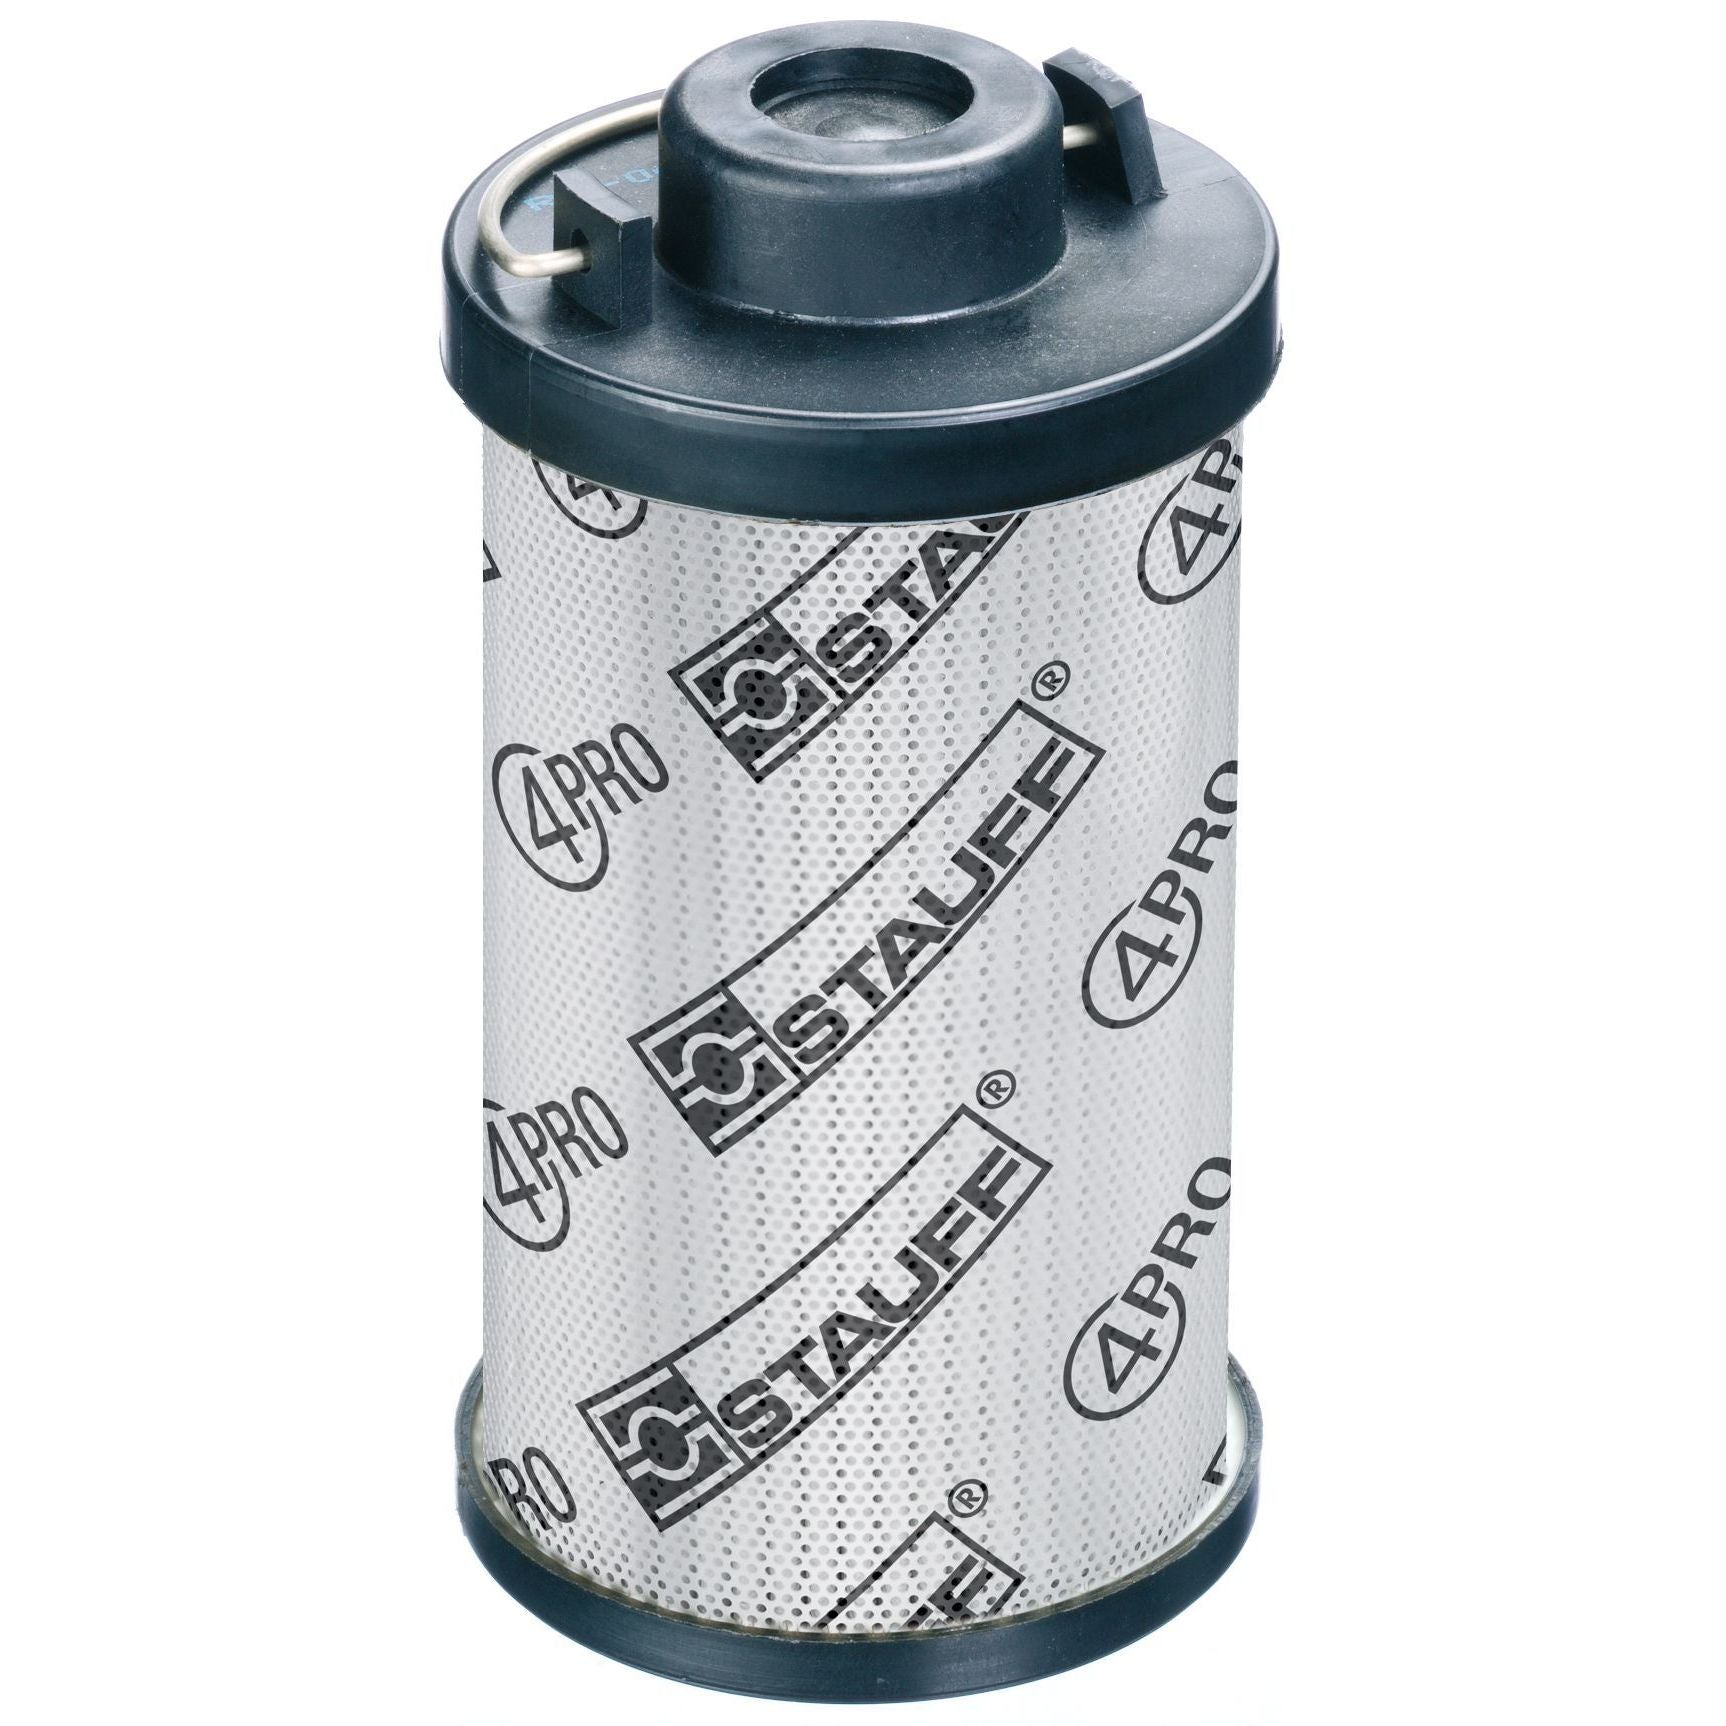 RE-022-N-20-B/2 : Stauff RF-022 Series Filter Element, 20 Micron, Paper Media, 145psi Collapse Differential, Buna